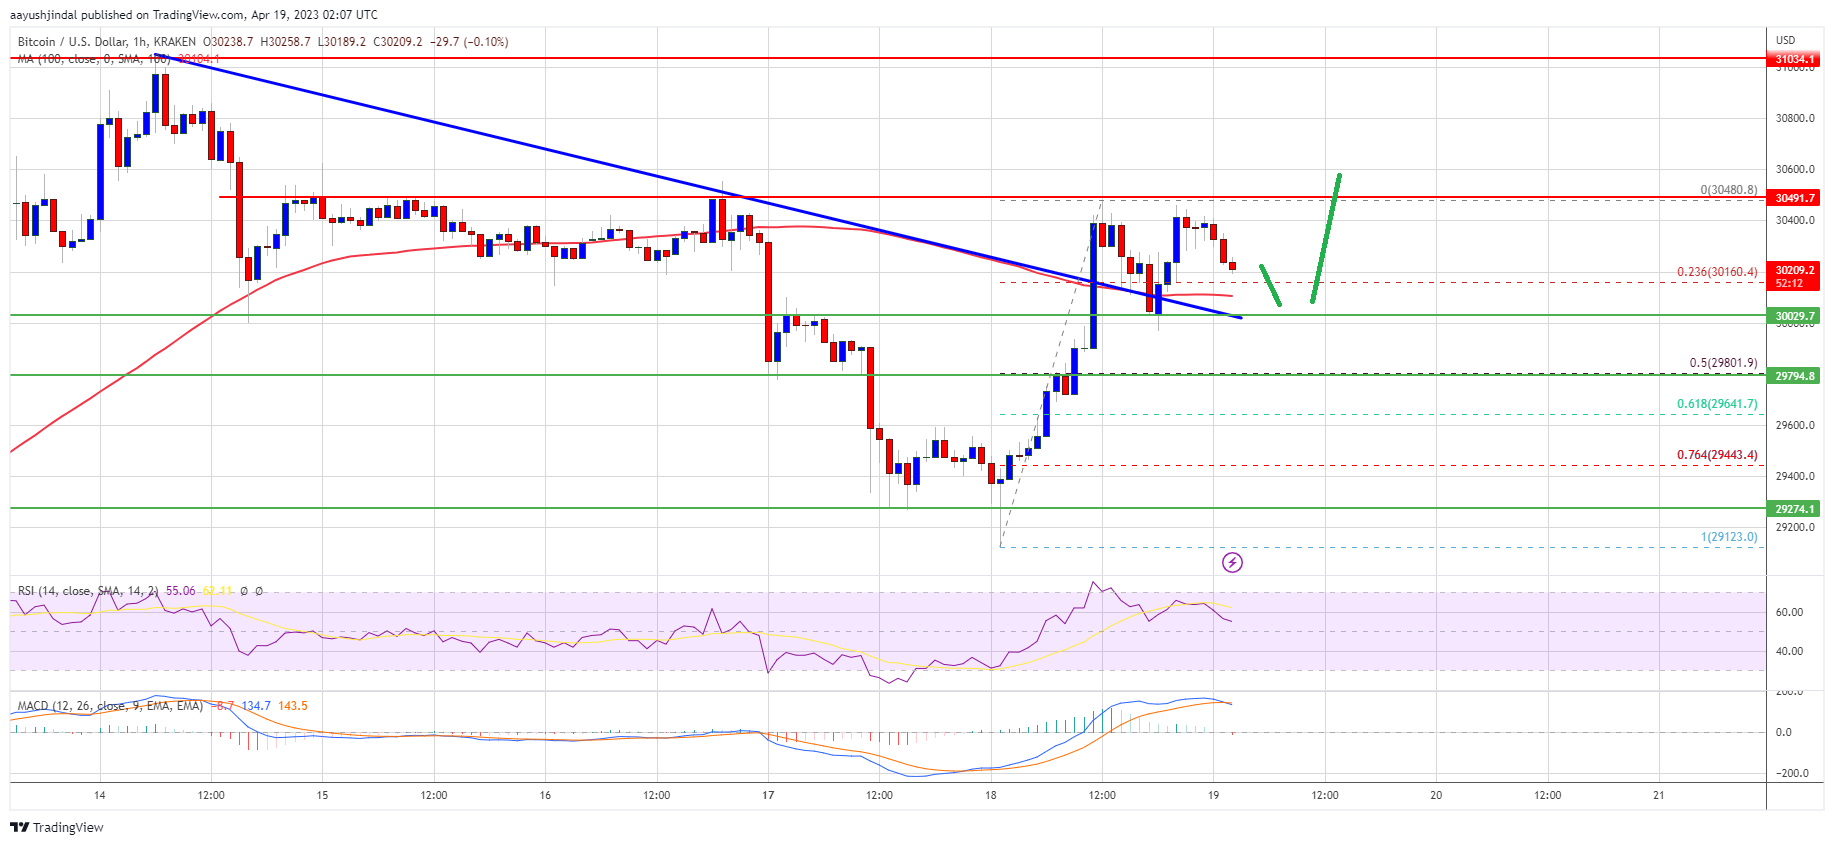 Bitcoin Price Regains Strength But BTC Must Clear This Key Resistance